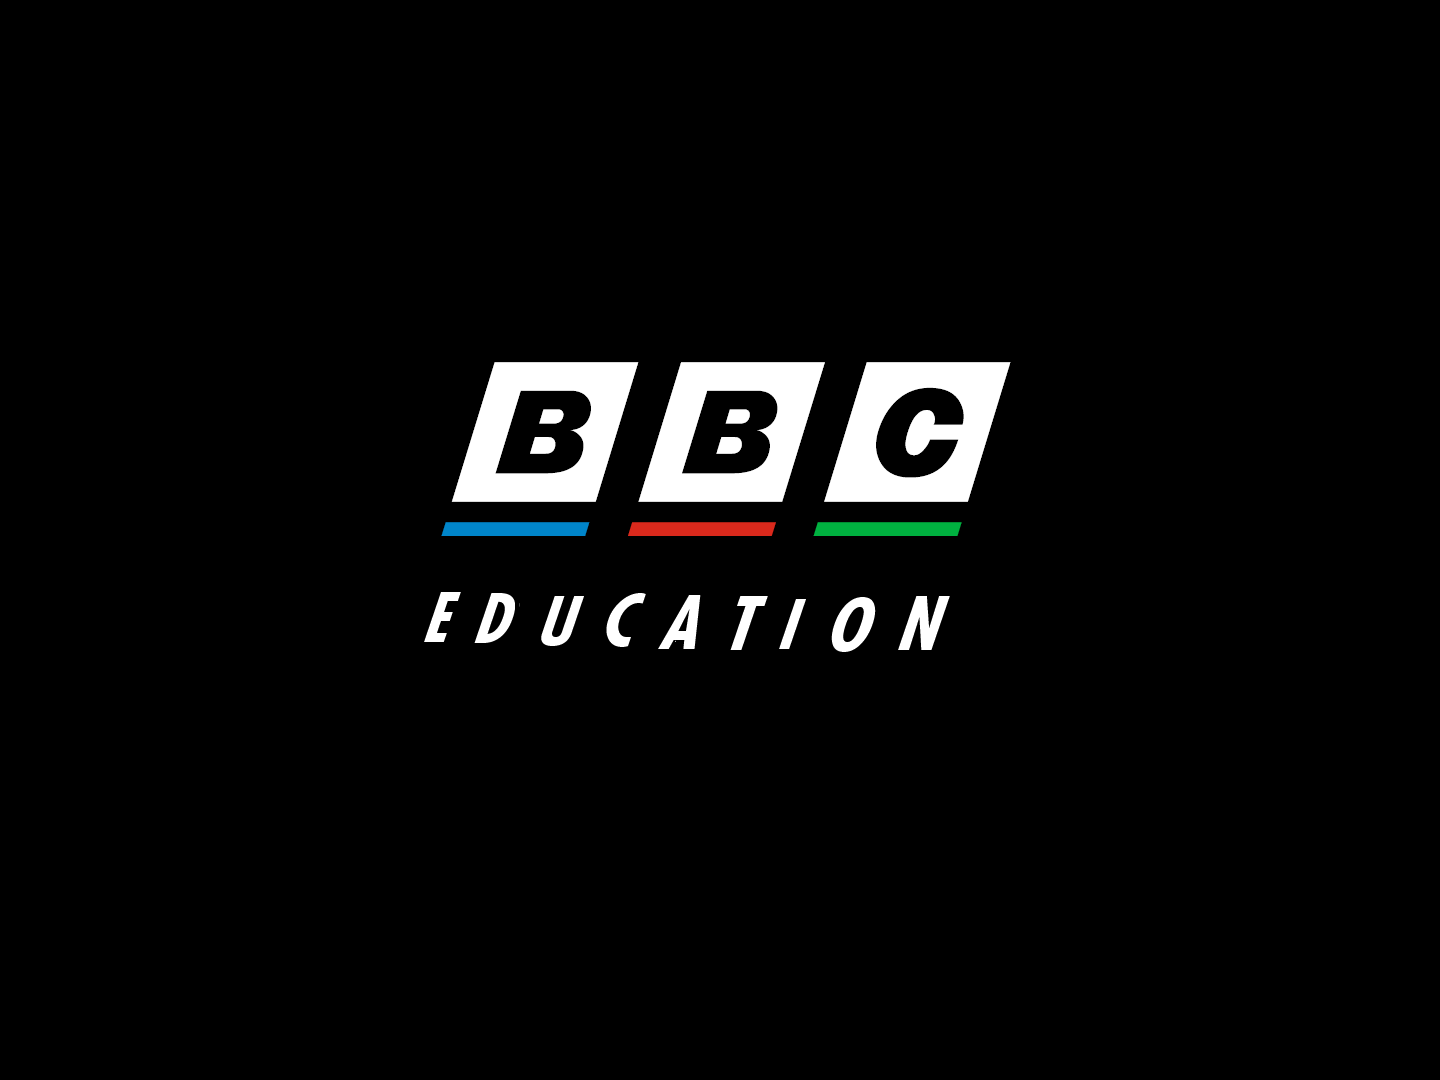 1990s Logo - BBC Education logo from the 1990s: An attempt at recreating the BBC ...